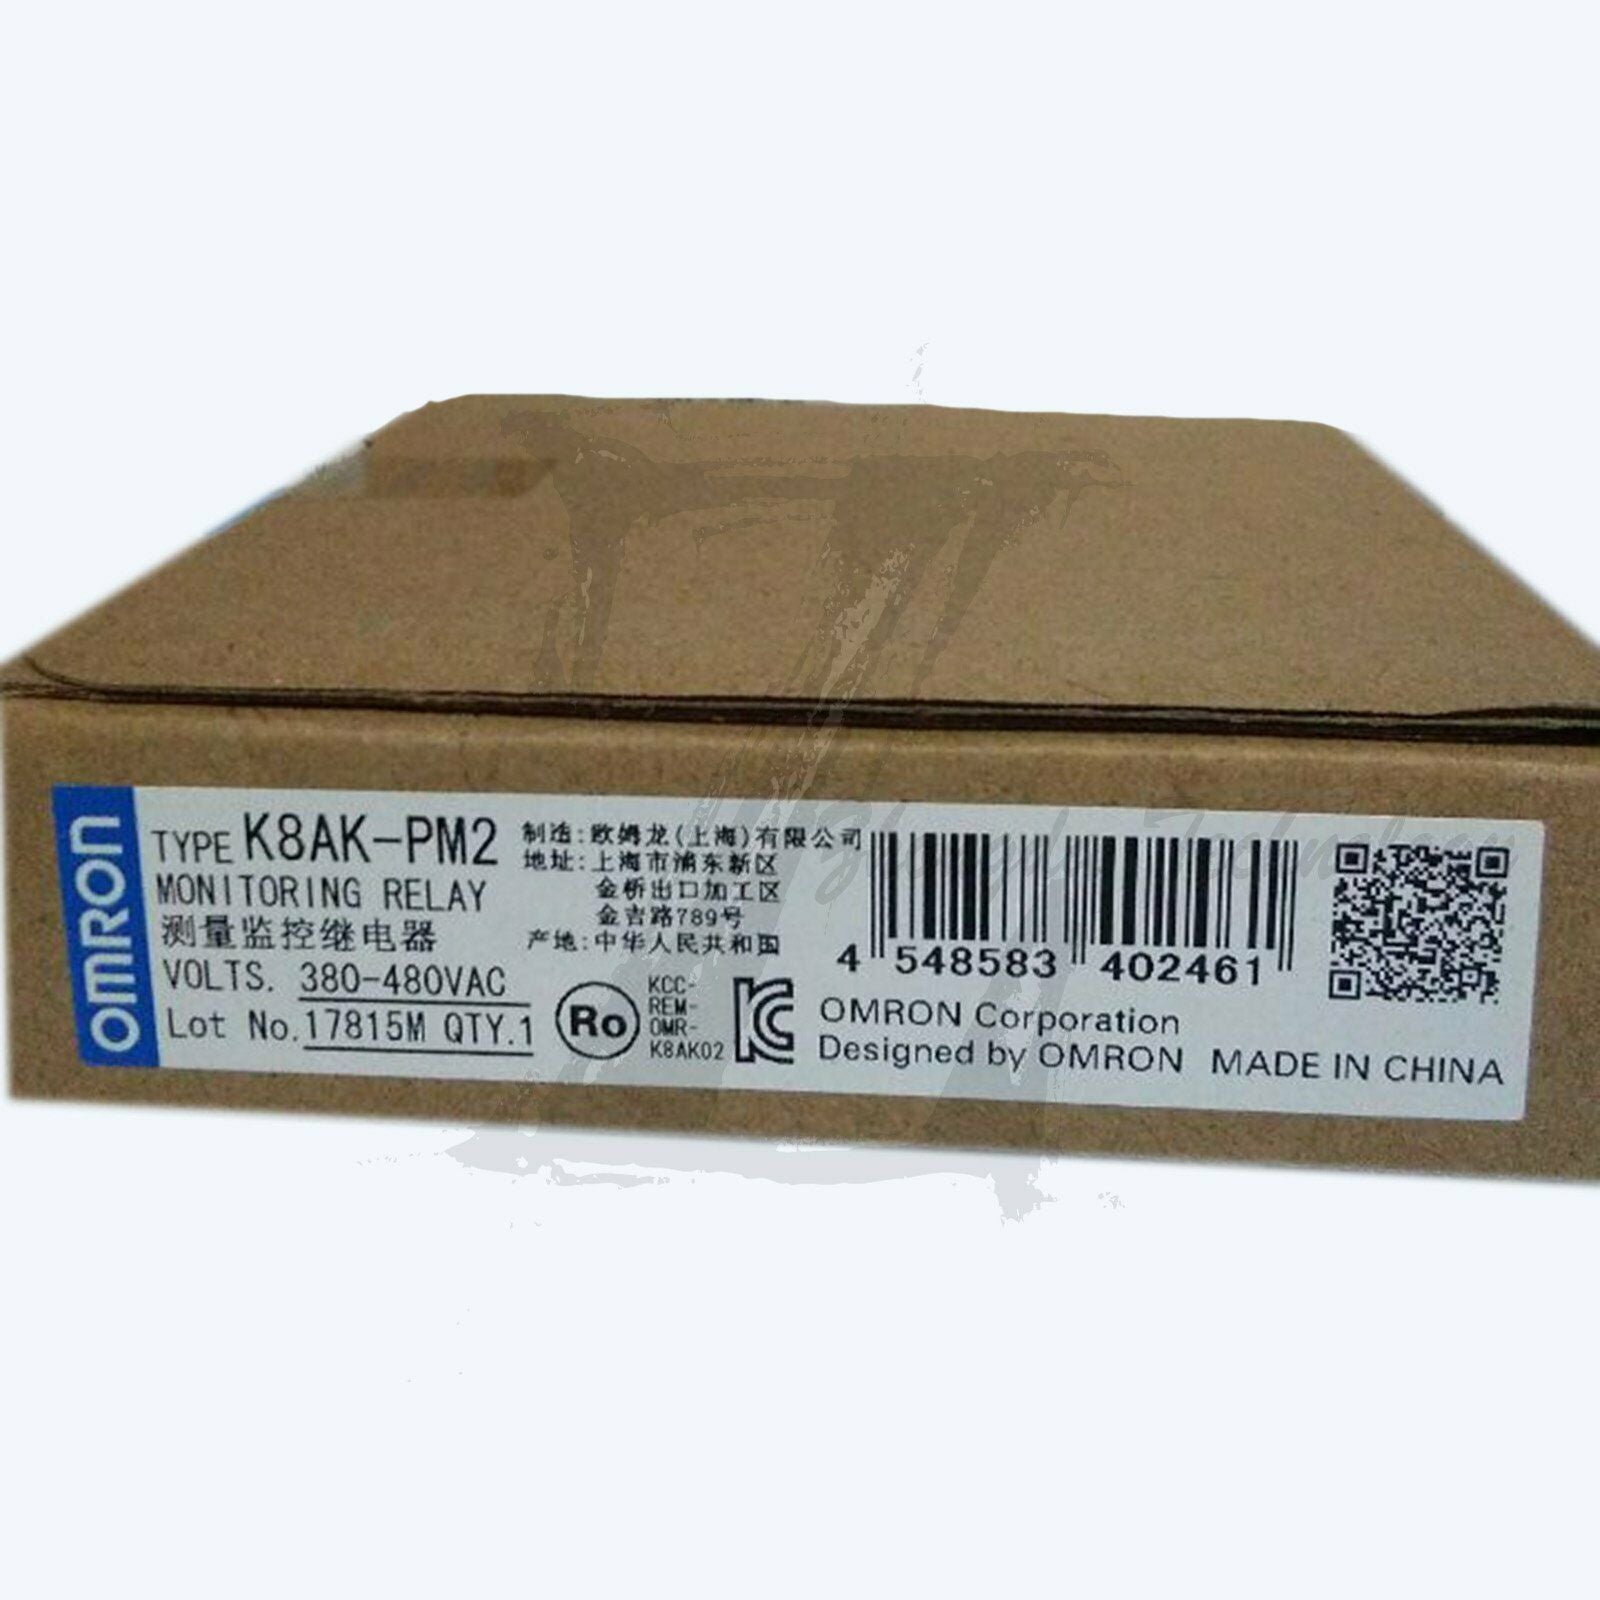 1PC new Omron relay K8AK-PM2 module one year warranty KOEED 101-200, 80%, import_2020_10_10_031751, Omron, Other